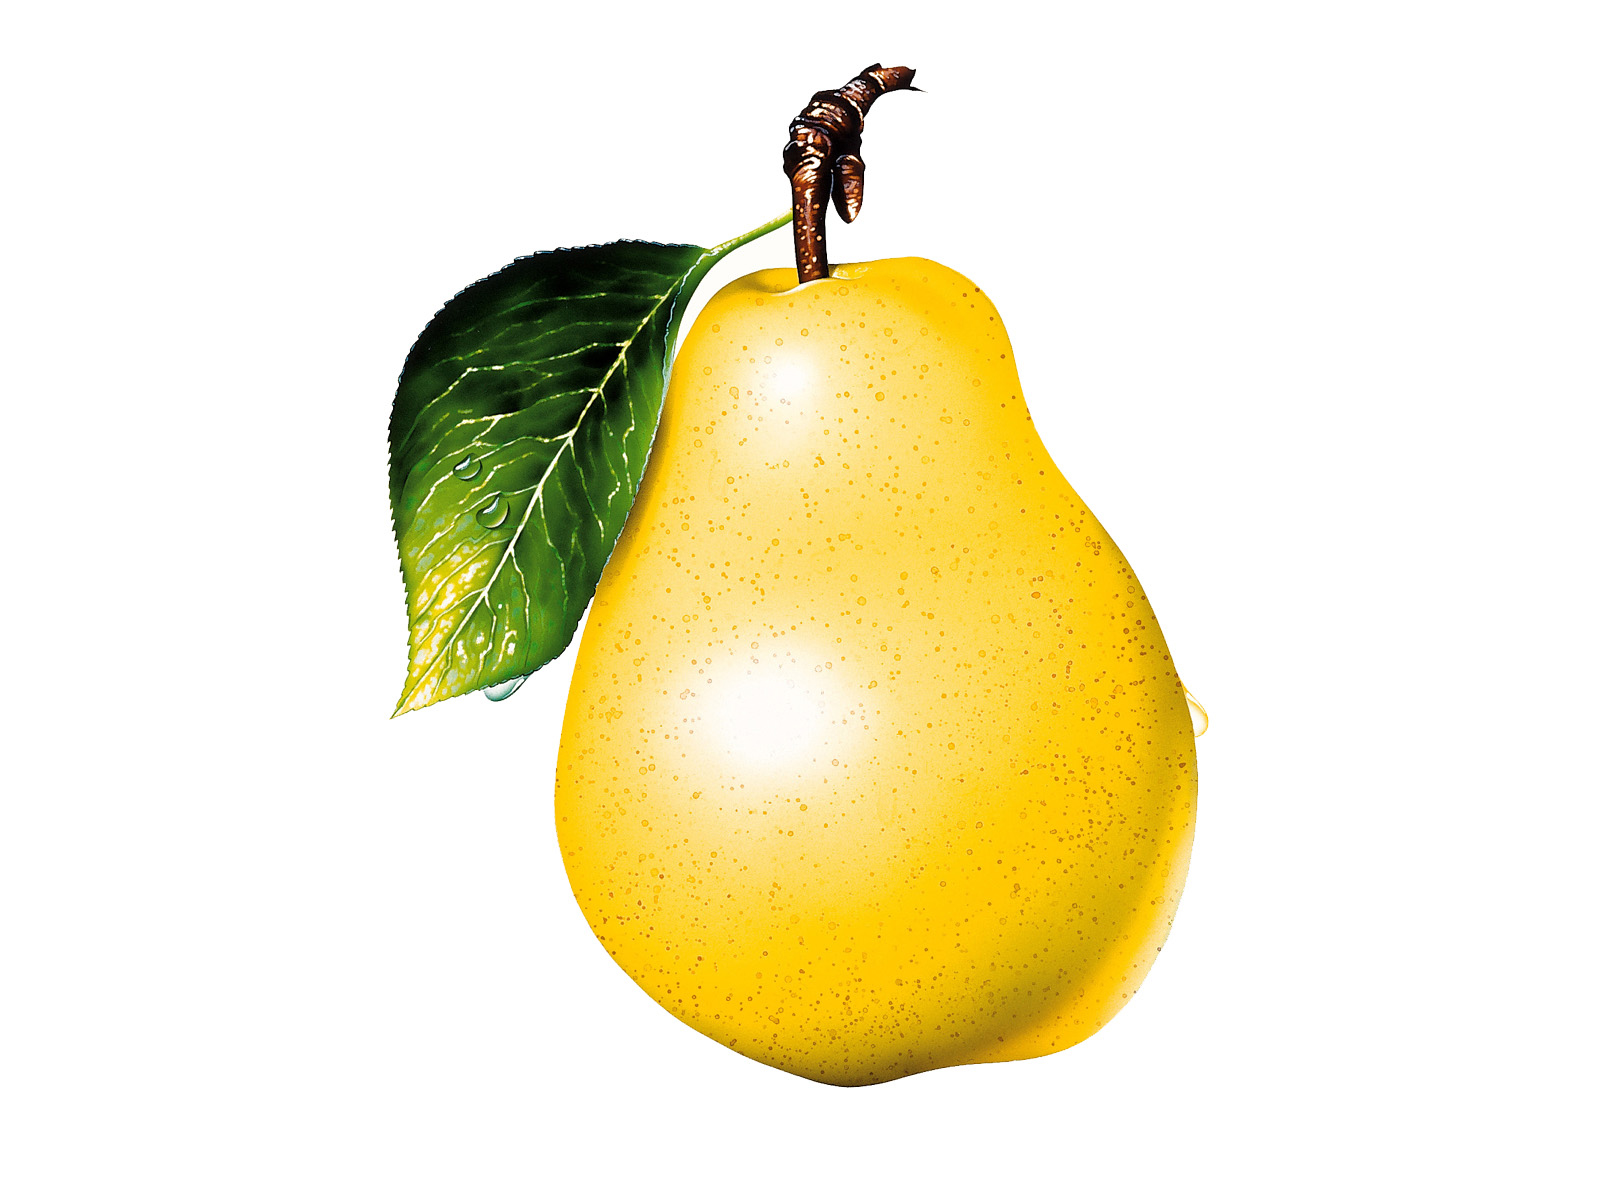 Download wallpaper: pear, clipart, photo, download